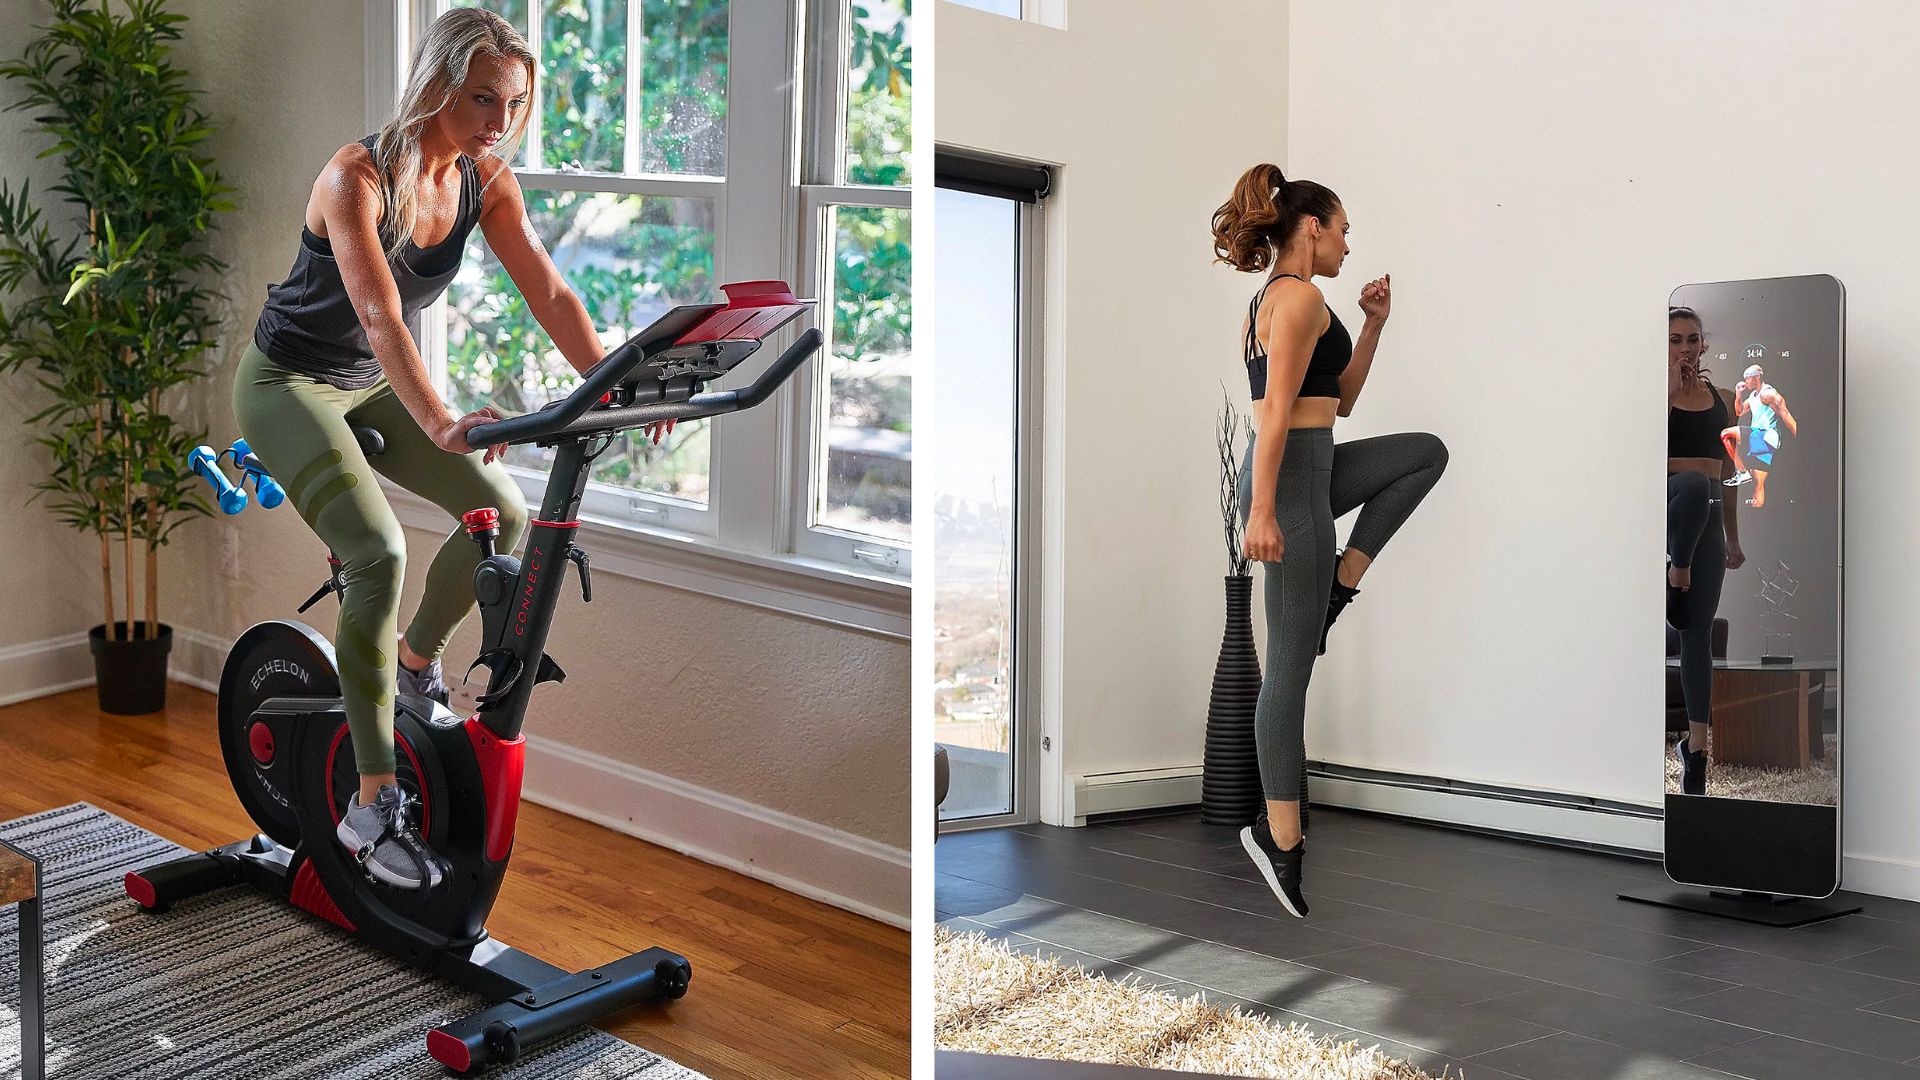 9 Workout Equipment To Get in Shape At Home